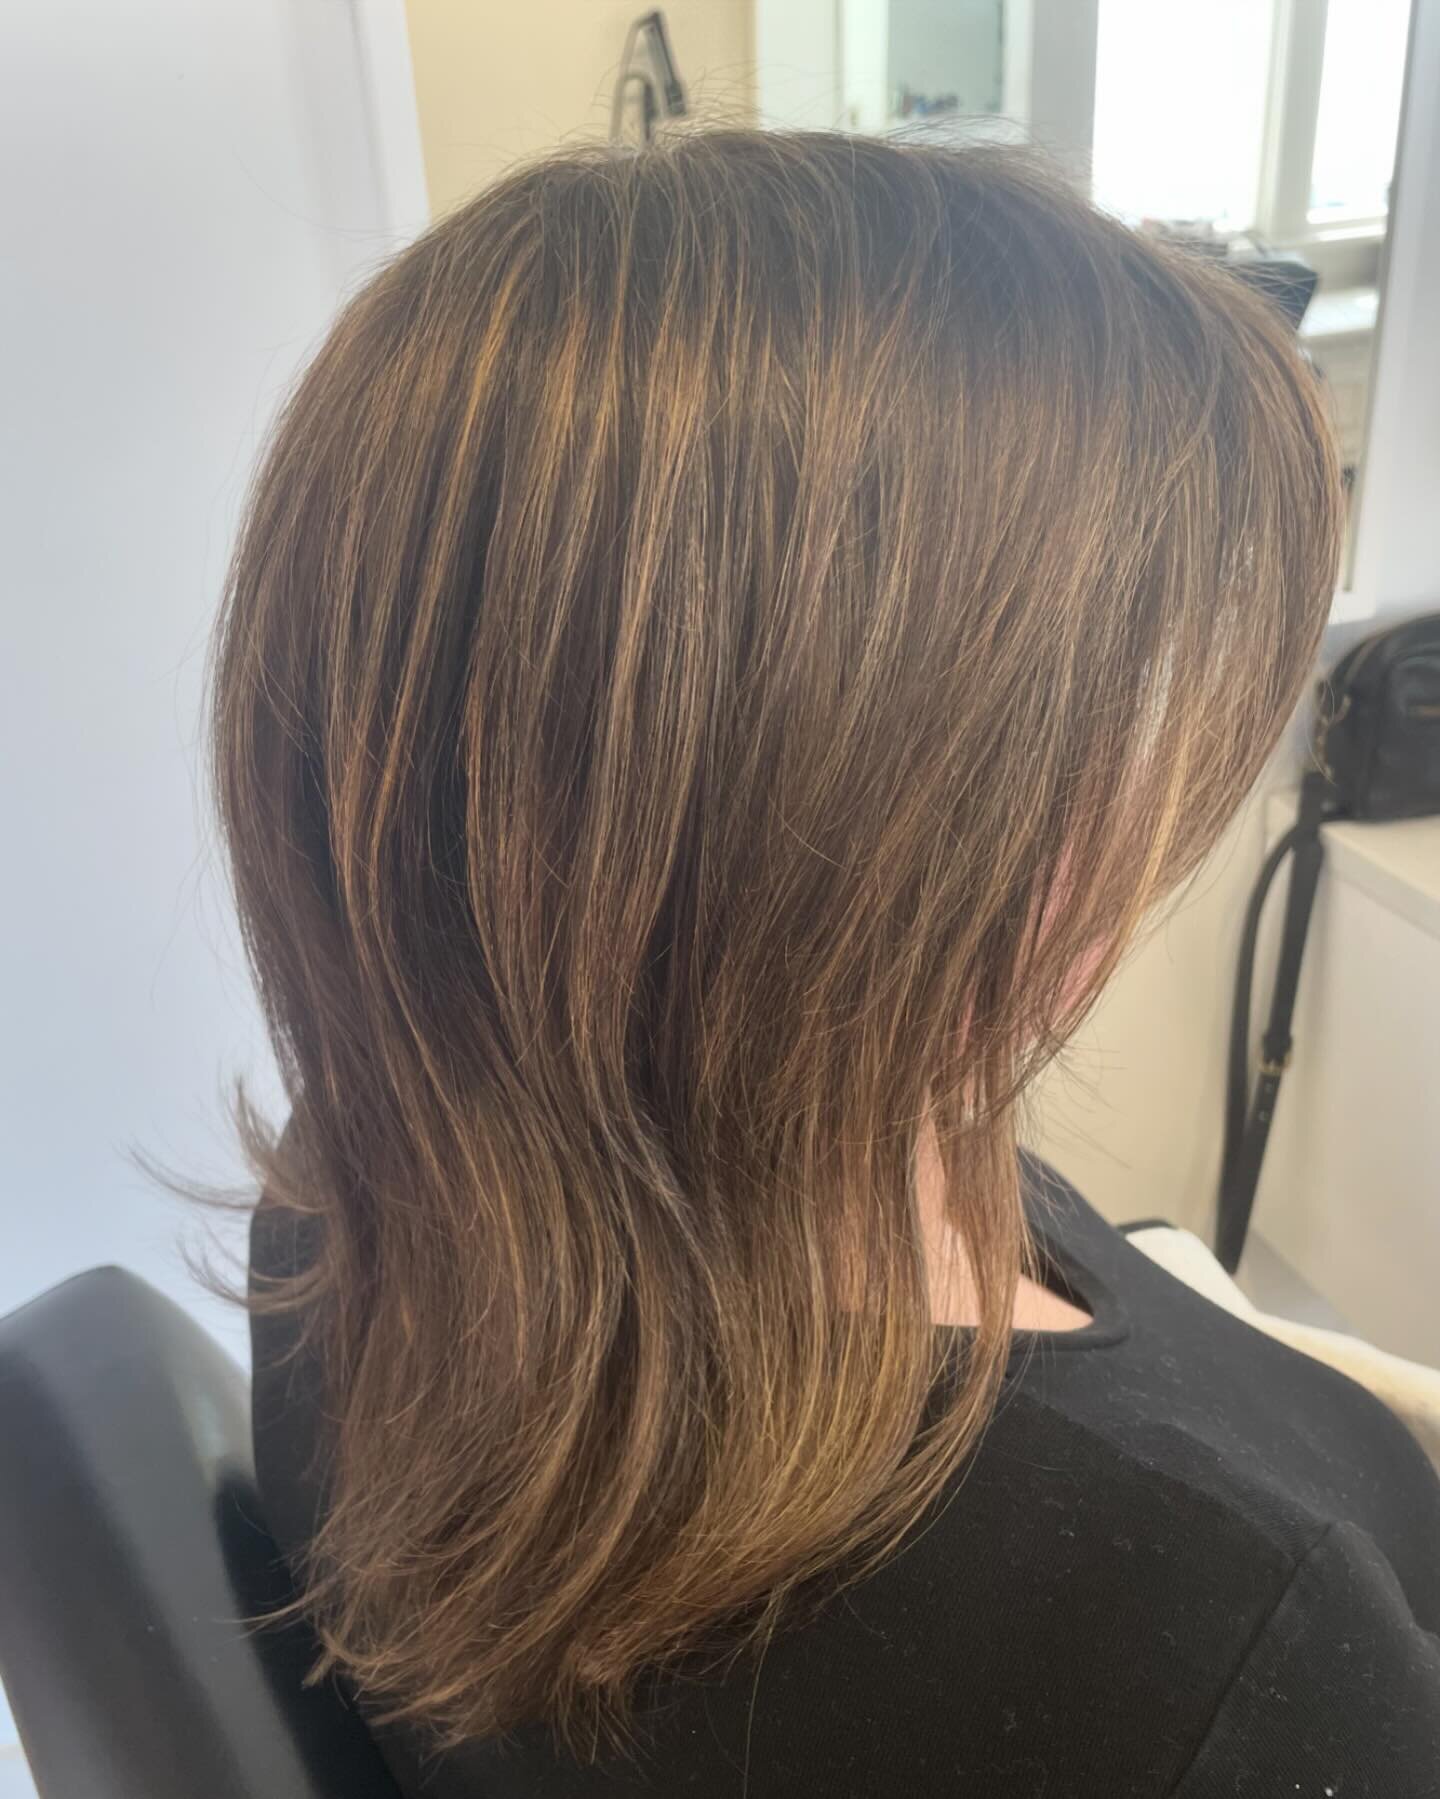 We changed up Joanna&rsquo;s hair today - she was feeling blah and gave me creative freedom to change her look- how&rsquo;d we do?:) we both loved the end result